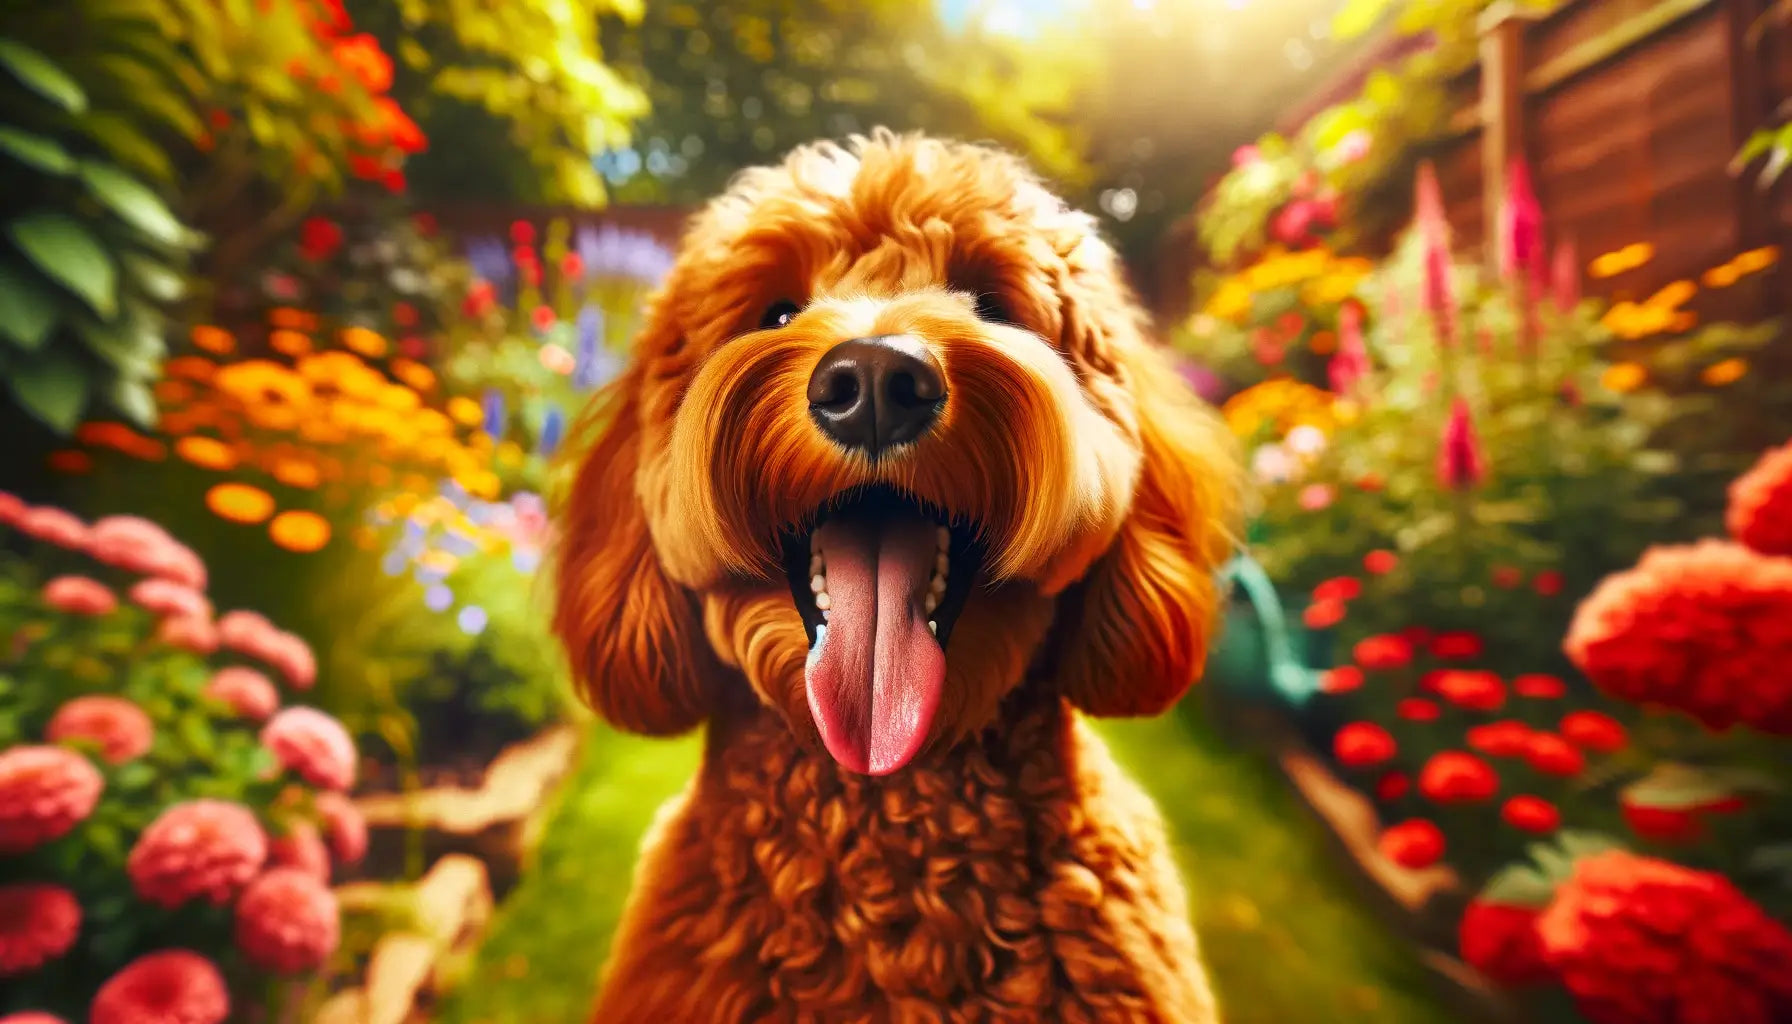 Red Goldendoodle with a joyful expression and tongue out, possibly in a garden or park.